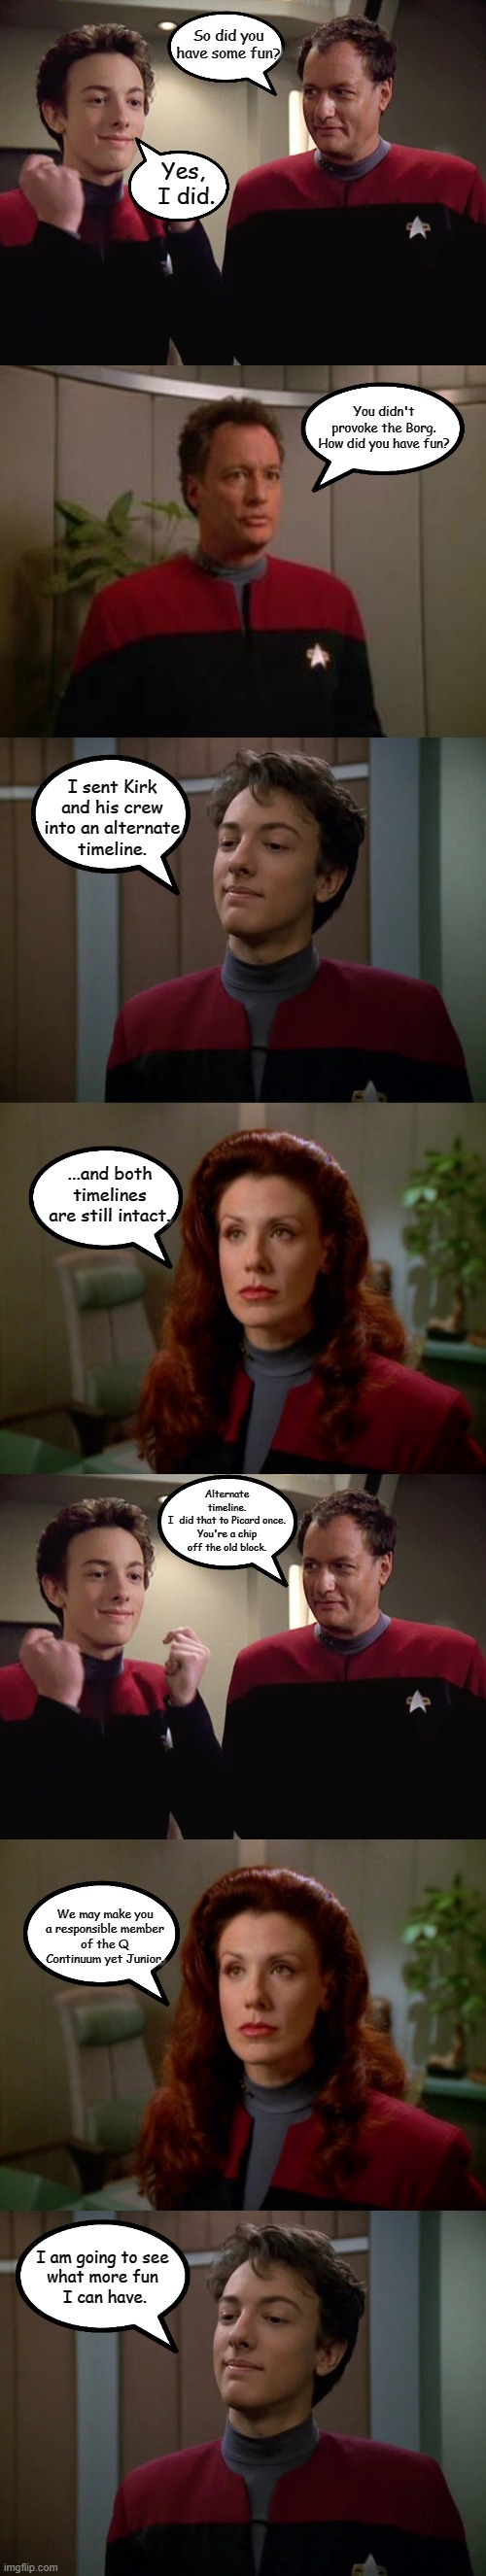 Another Q Family Conversation | So did you have some fun? Yes,
 I did. You didn't provoke the Borg.
How did you have fun? I sent Kirk
and his crew
into an alternate
timeline. ...and both timelines are still intact. Alternate timeline.
I  did that to Picard once.
You're a chip off the old block. We may make you
a responsible member
of the Q Continuum yet Junior. I am going to see 
what more fun 
I can have. | image tagged in star trek,memes,q,q junior | made w/ Imgflip meme maker